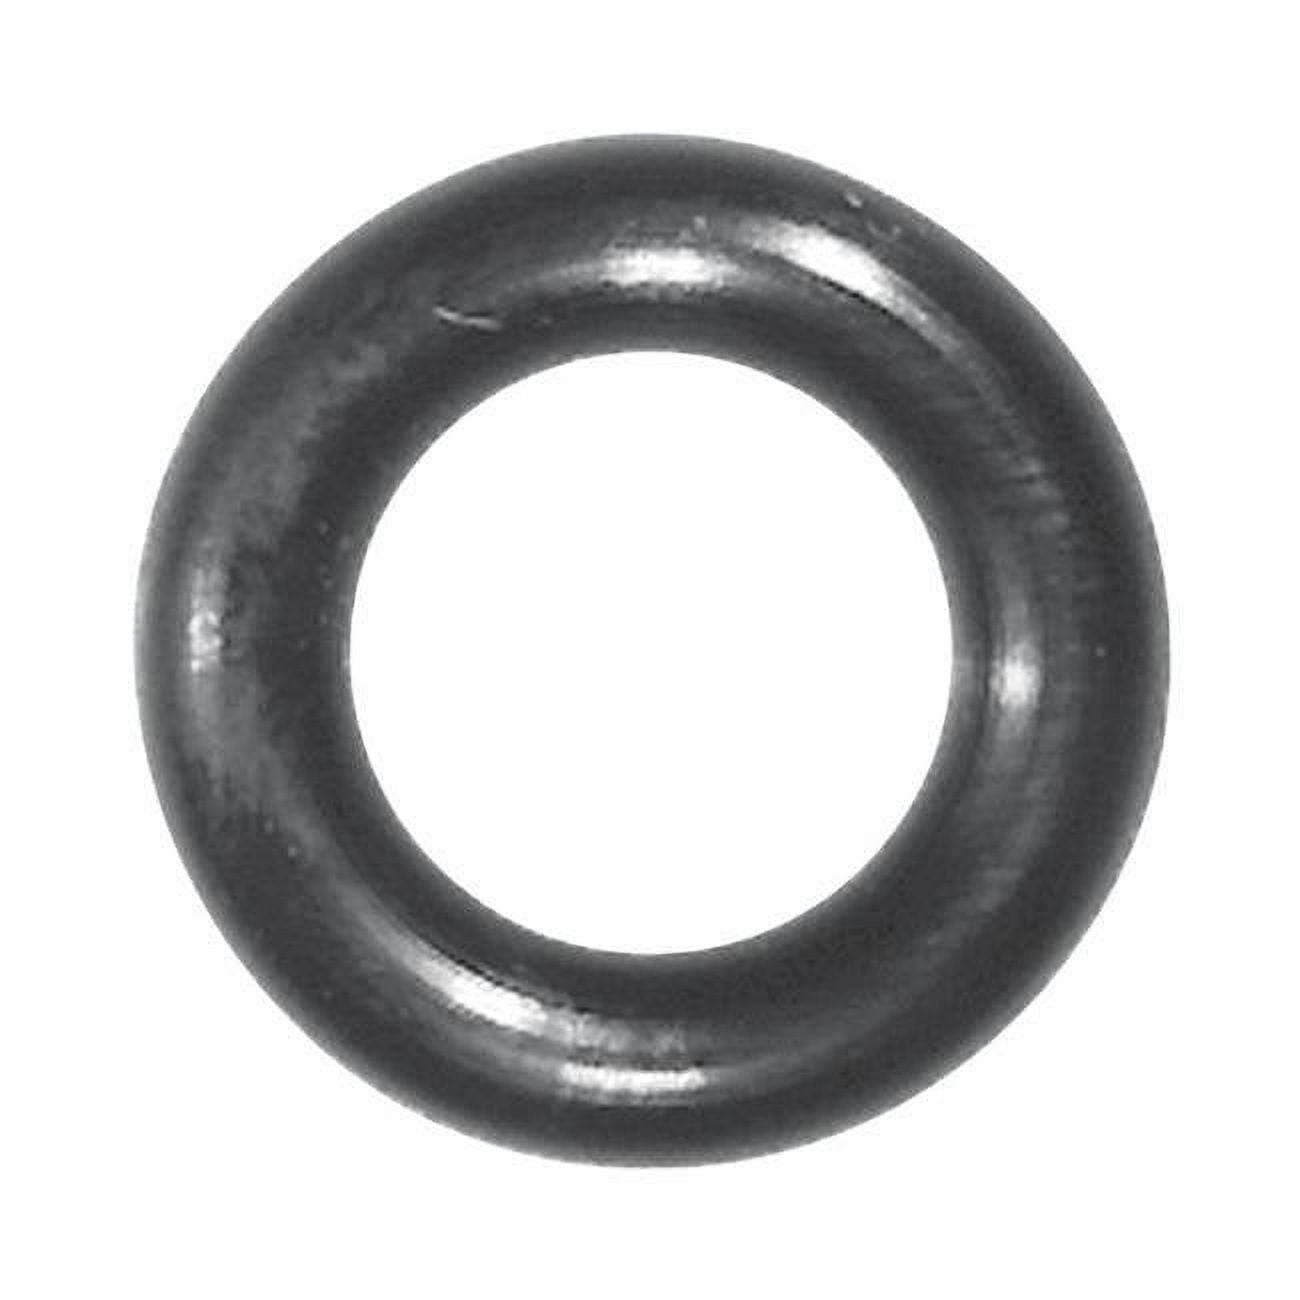 35762b 0.6 X 0.37 X 0.12 In. O-ring Faucet- Pack Of 5